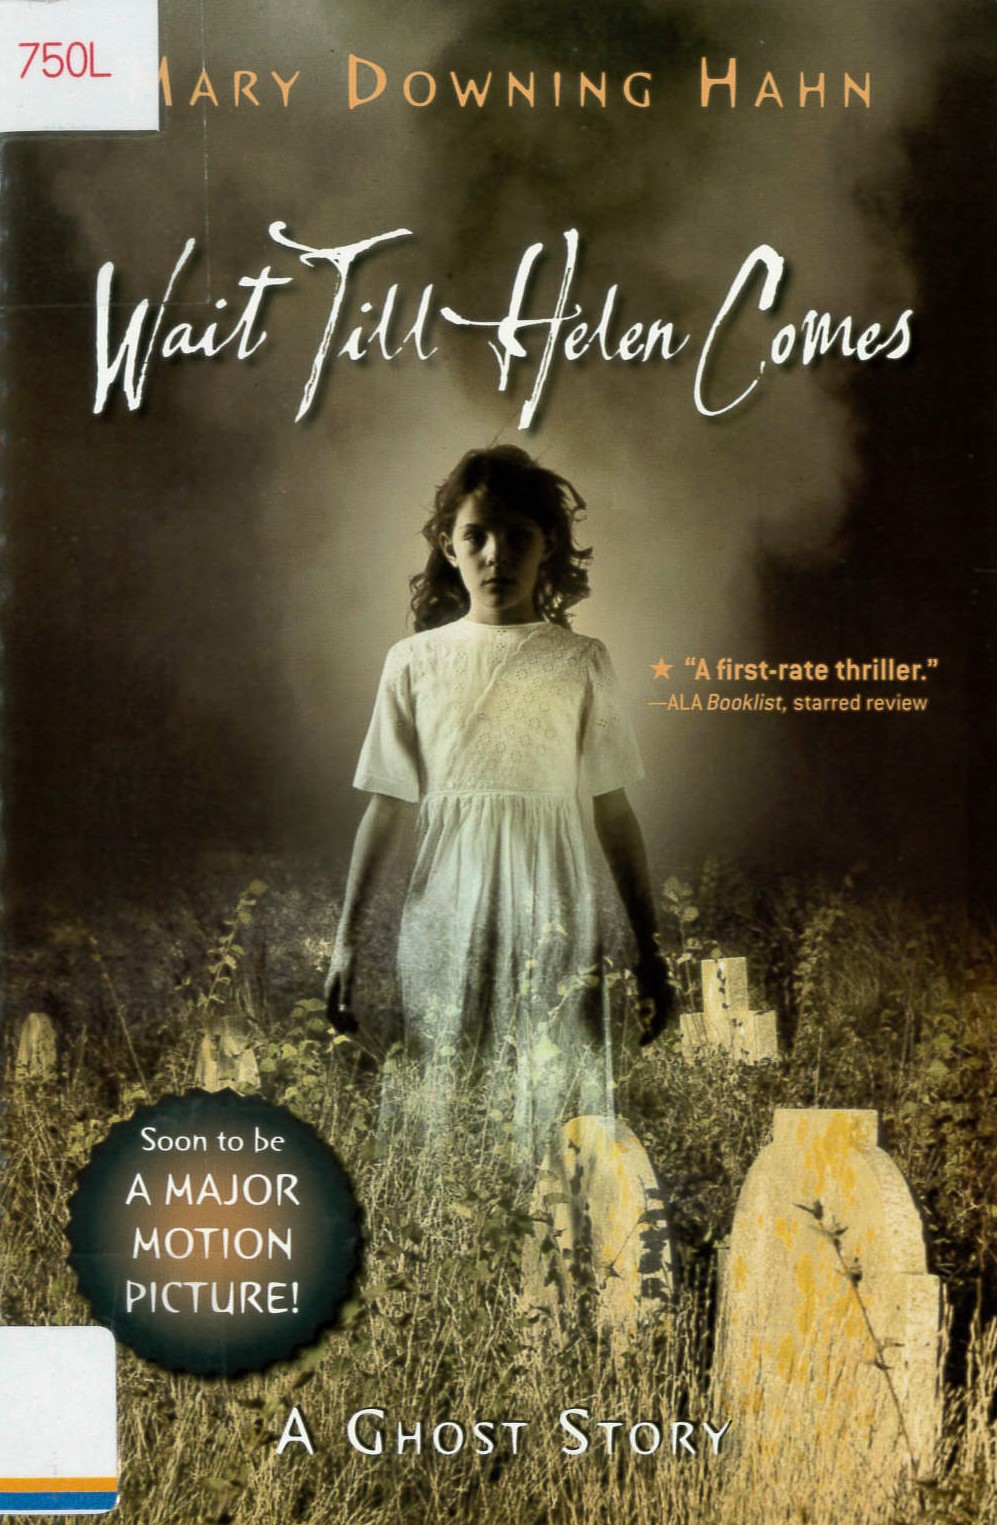 Wait till Helen comes : a ghost story /